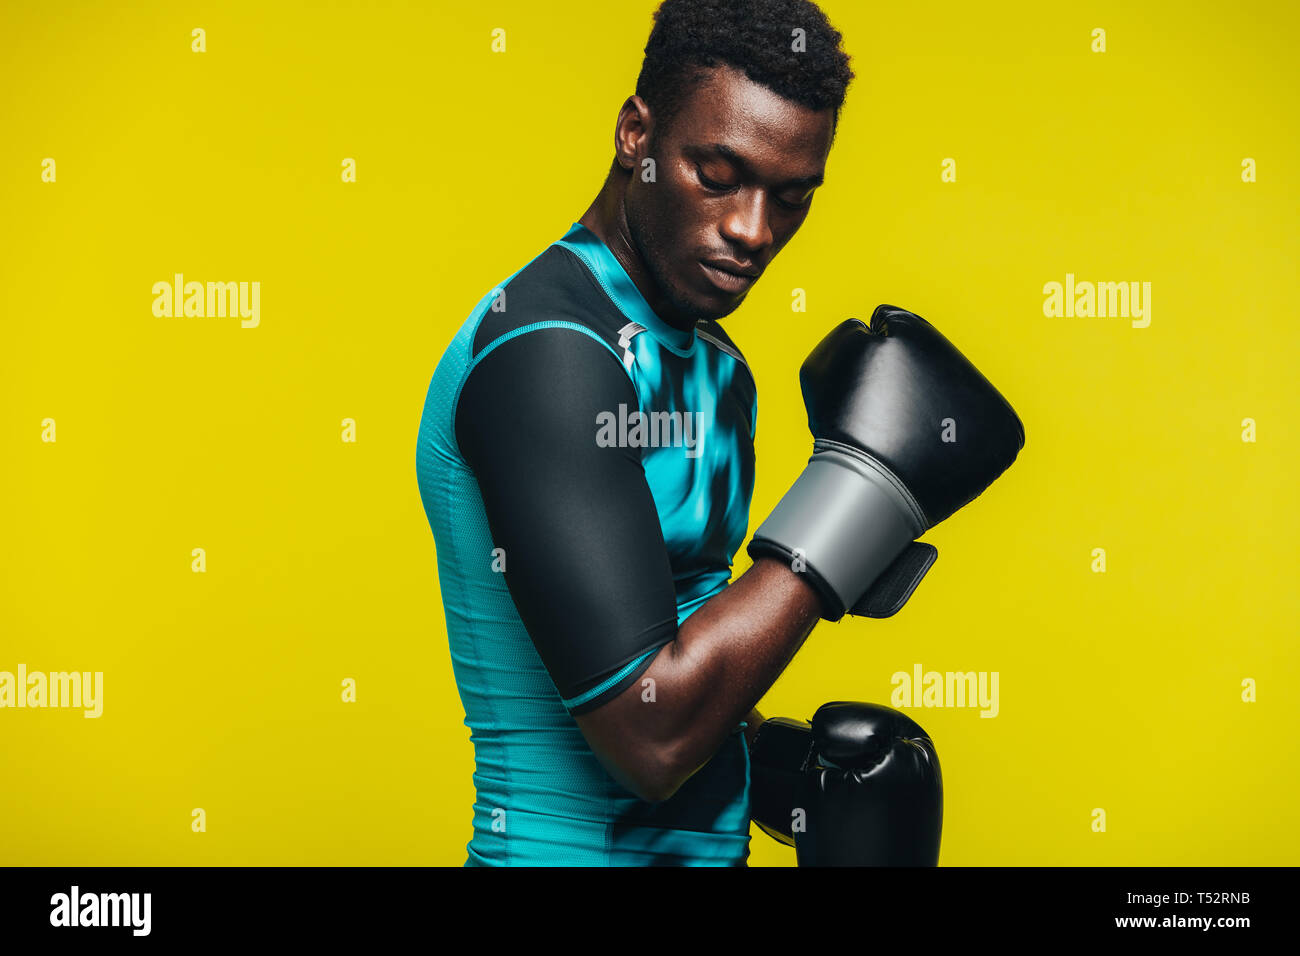 African man with boxing gloves against yellow background. Fit young male boxer practicing. Stock Photo